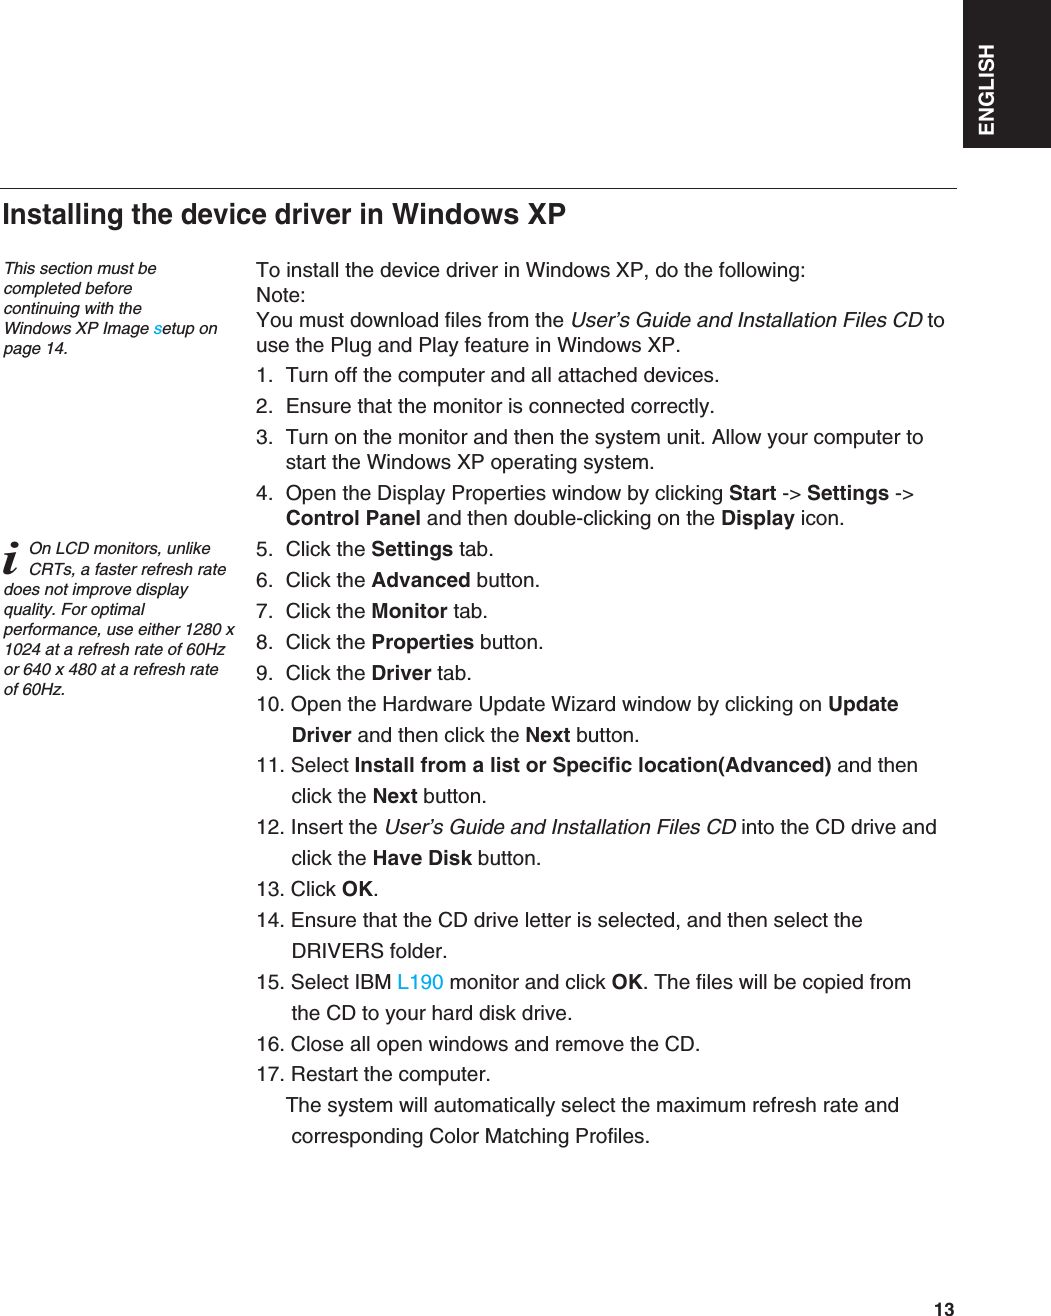 ENGLISH13To install the device driver in Windows XP, do the following: Note:You must download files from the User’s Guide and Installation Files CD touse the Plug and Play feature in Windows XP.1. Turn off the computer and all attached devices.2. Ensure that the monitor is connected correctly.3. Turn on the monitor and then the system unit. Allow your computer tostart the Windows XP operating system.4. Open the Display Properties window by clicking Start -&gt; Settings -&gt;Control Panel and then double-clicking on the Display icon.5. Click the Settings tab.6. Click the Advanced button.7. Click the Monitor tab.8. Click the Properties button.9. Click the Driver tab.10. Open the Hardware Update Wizard window by clicking on Update Driver and then click the Next button.11. Select Install from a list or Specific location(Advanced) and then click the Next button.12. Insert the User’s Guide and Installation Files CD into the CD drive and click the Have Disk button.13. Click OK.14. Ensure that the CD drive letter is selected, and then select the DRIVERS folder.15. Select IBM L190 monitor and click OK. The files will be copied from the CD to your hard disk drive.16. Close all open windows and remove the CD.17. Restart the computer.The system will automatically select the maximum refresh rate and corresponding Color Matching Profiles.Installing the device driver in Windows XP This section must becompleted before continuing with the Windows XP Image setup onpage 14.iOn LCD monitors, unlikeCRTs, a faster refresh ratedoes not improve displayquality. For optimalperformance, use either 1280 x1024 at a refresh rate of 60Hzor 640 x 480 at a refresh rateof 60Hz.